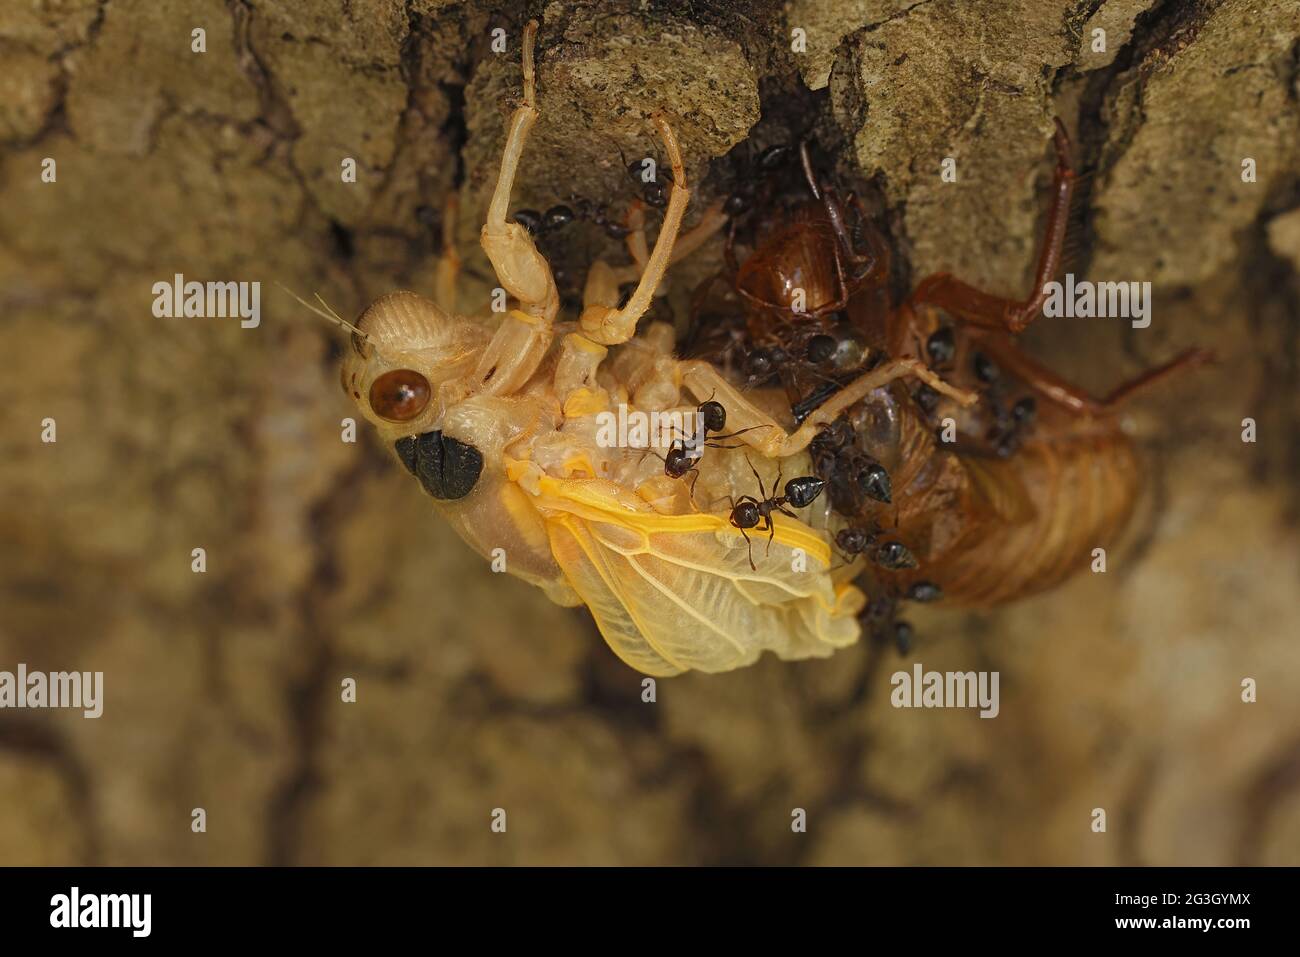 Periodical cicada, Magicicada septendecim, 17-year periodical cicada, teneral adult Brood X cicada, molting, being attacked and eventually consumed by Stock Photo